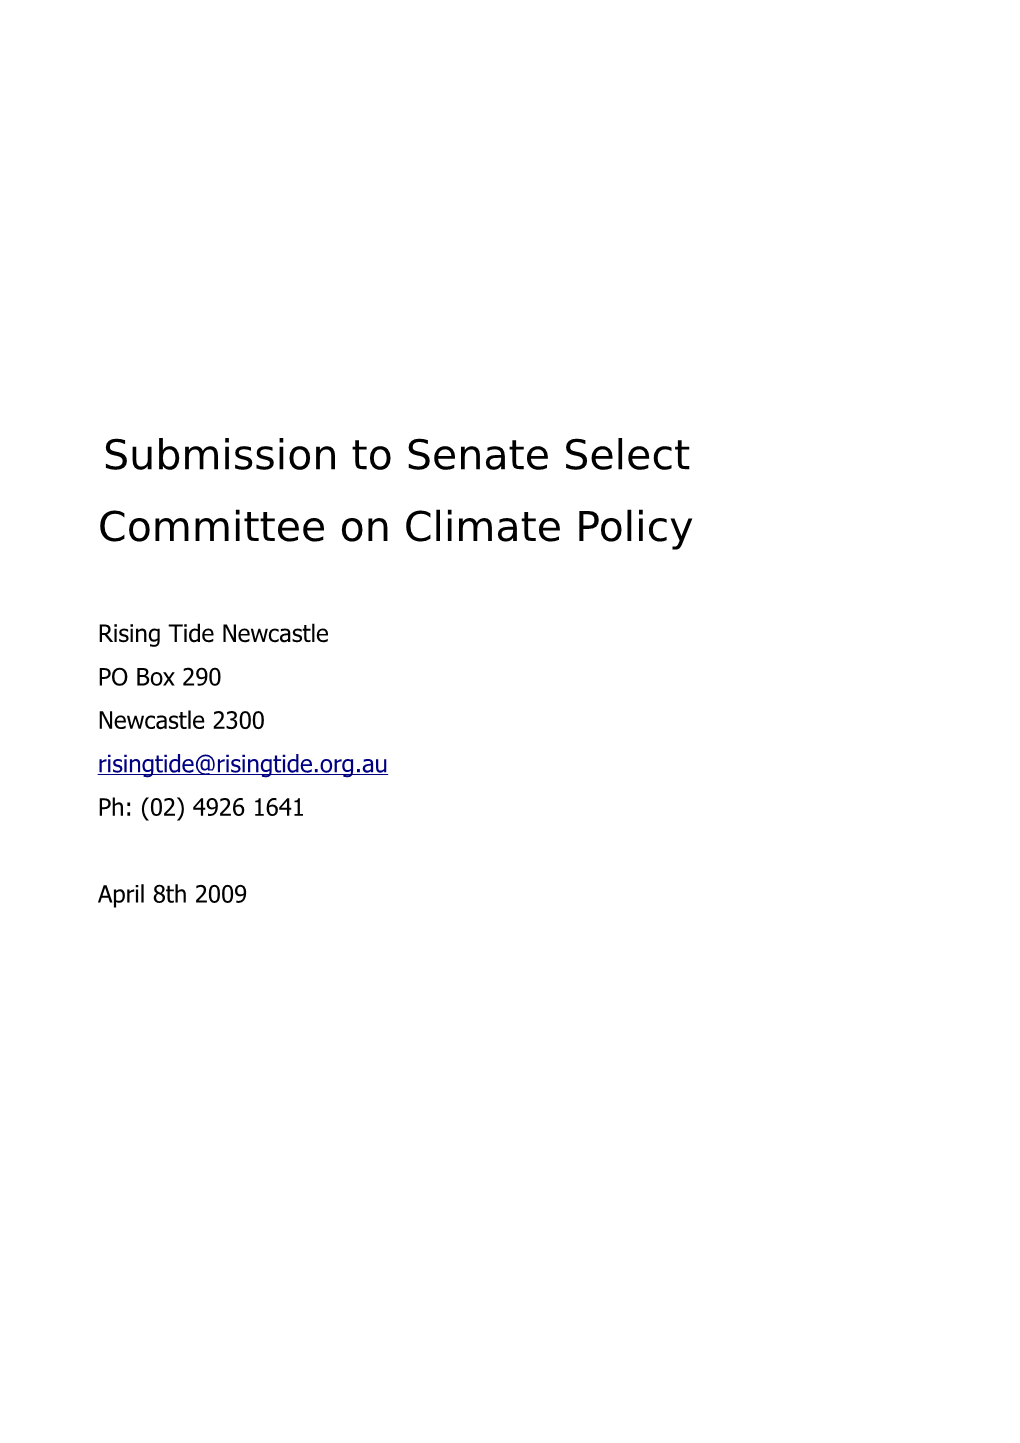 Submission: Senate Select Committee on Climate Policy